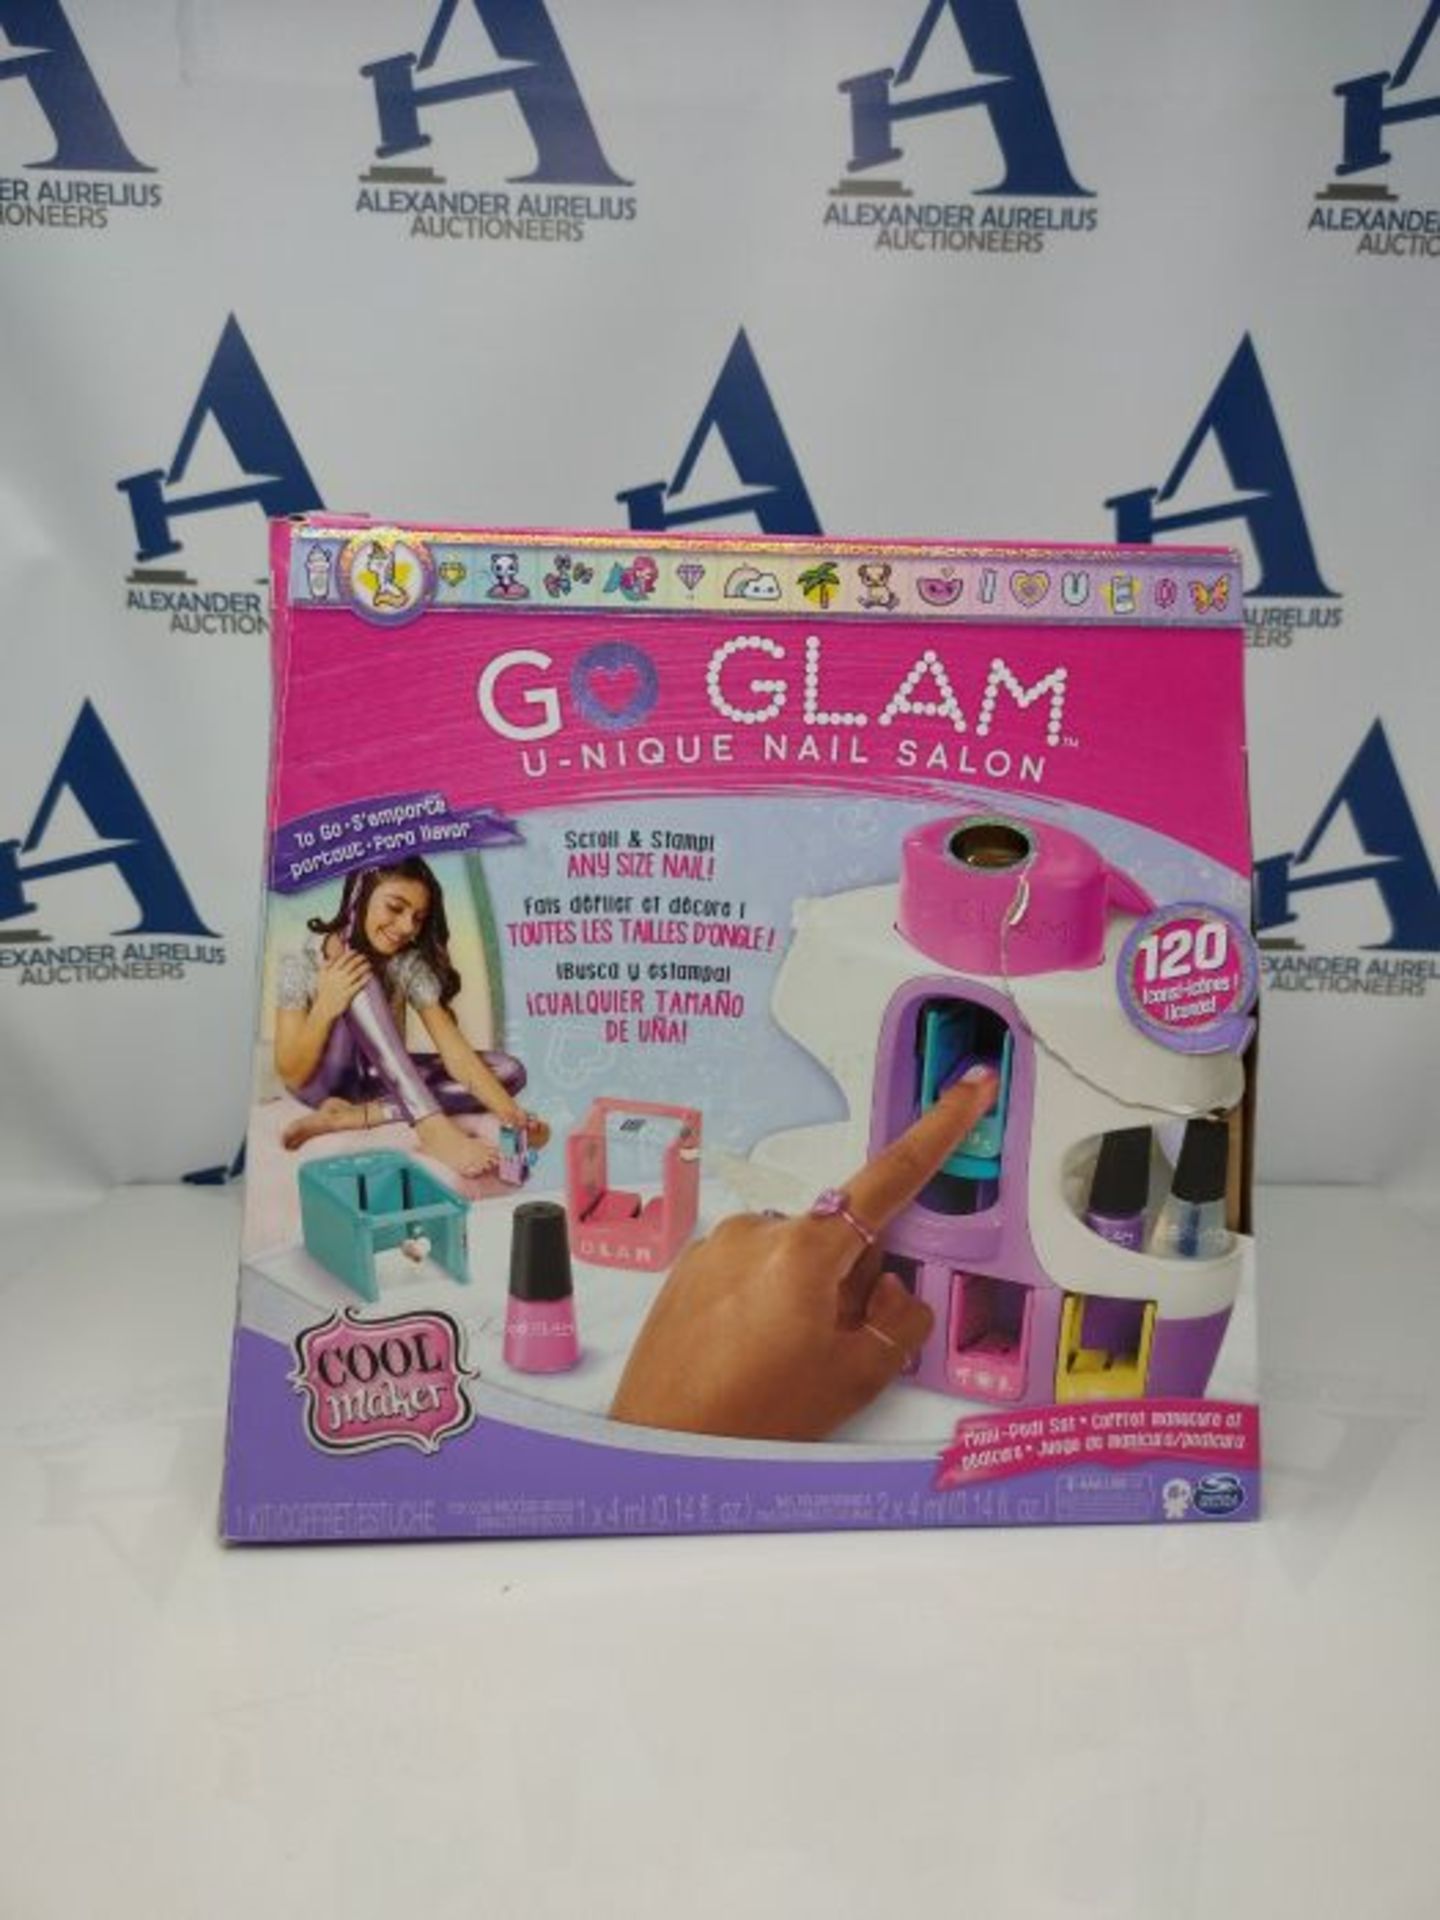 Cool Maker GO GLAM U-nique Nail Salon with Portable Stamper, 5 Design Pods and Dryer, - Image 2 of 3